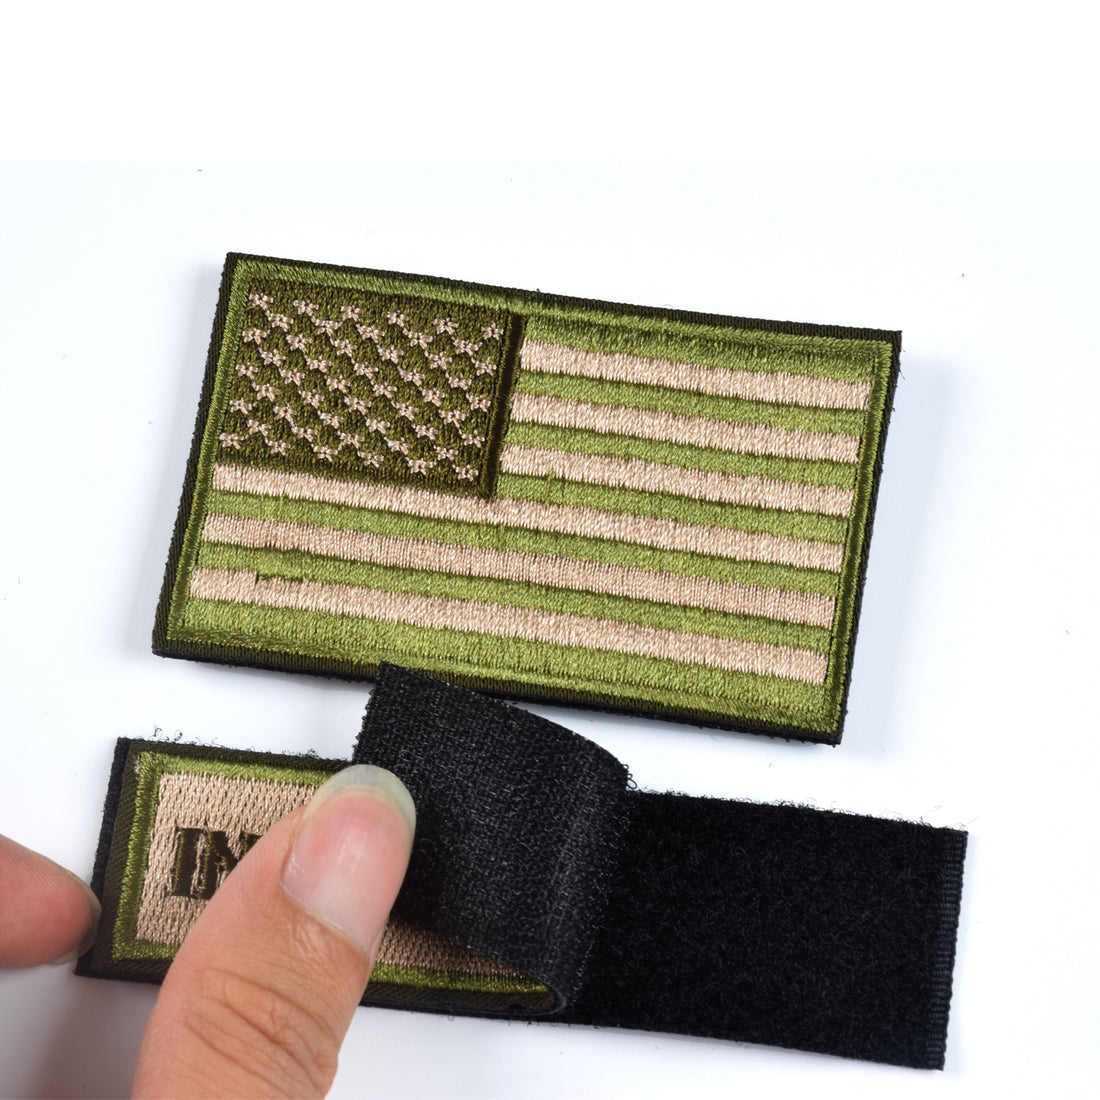 In God We Trust & USA American Flag Patches, Green